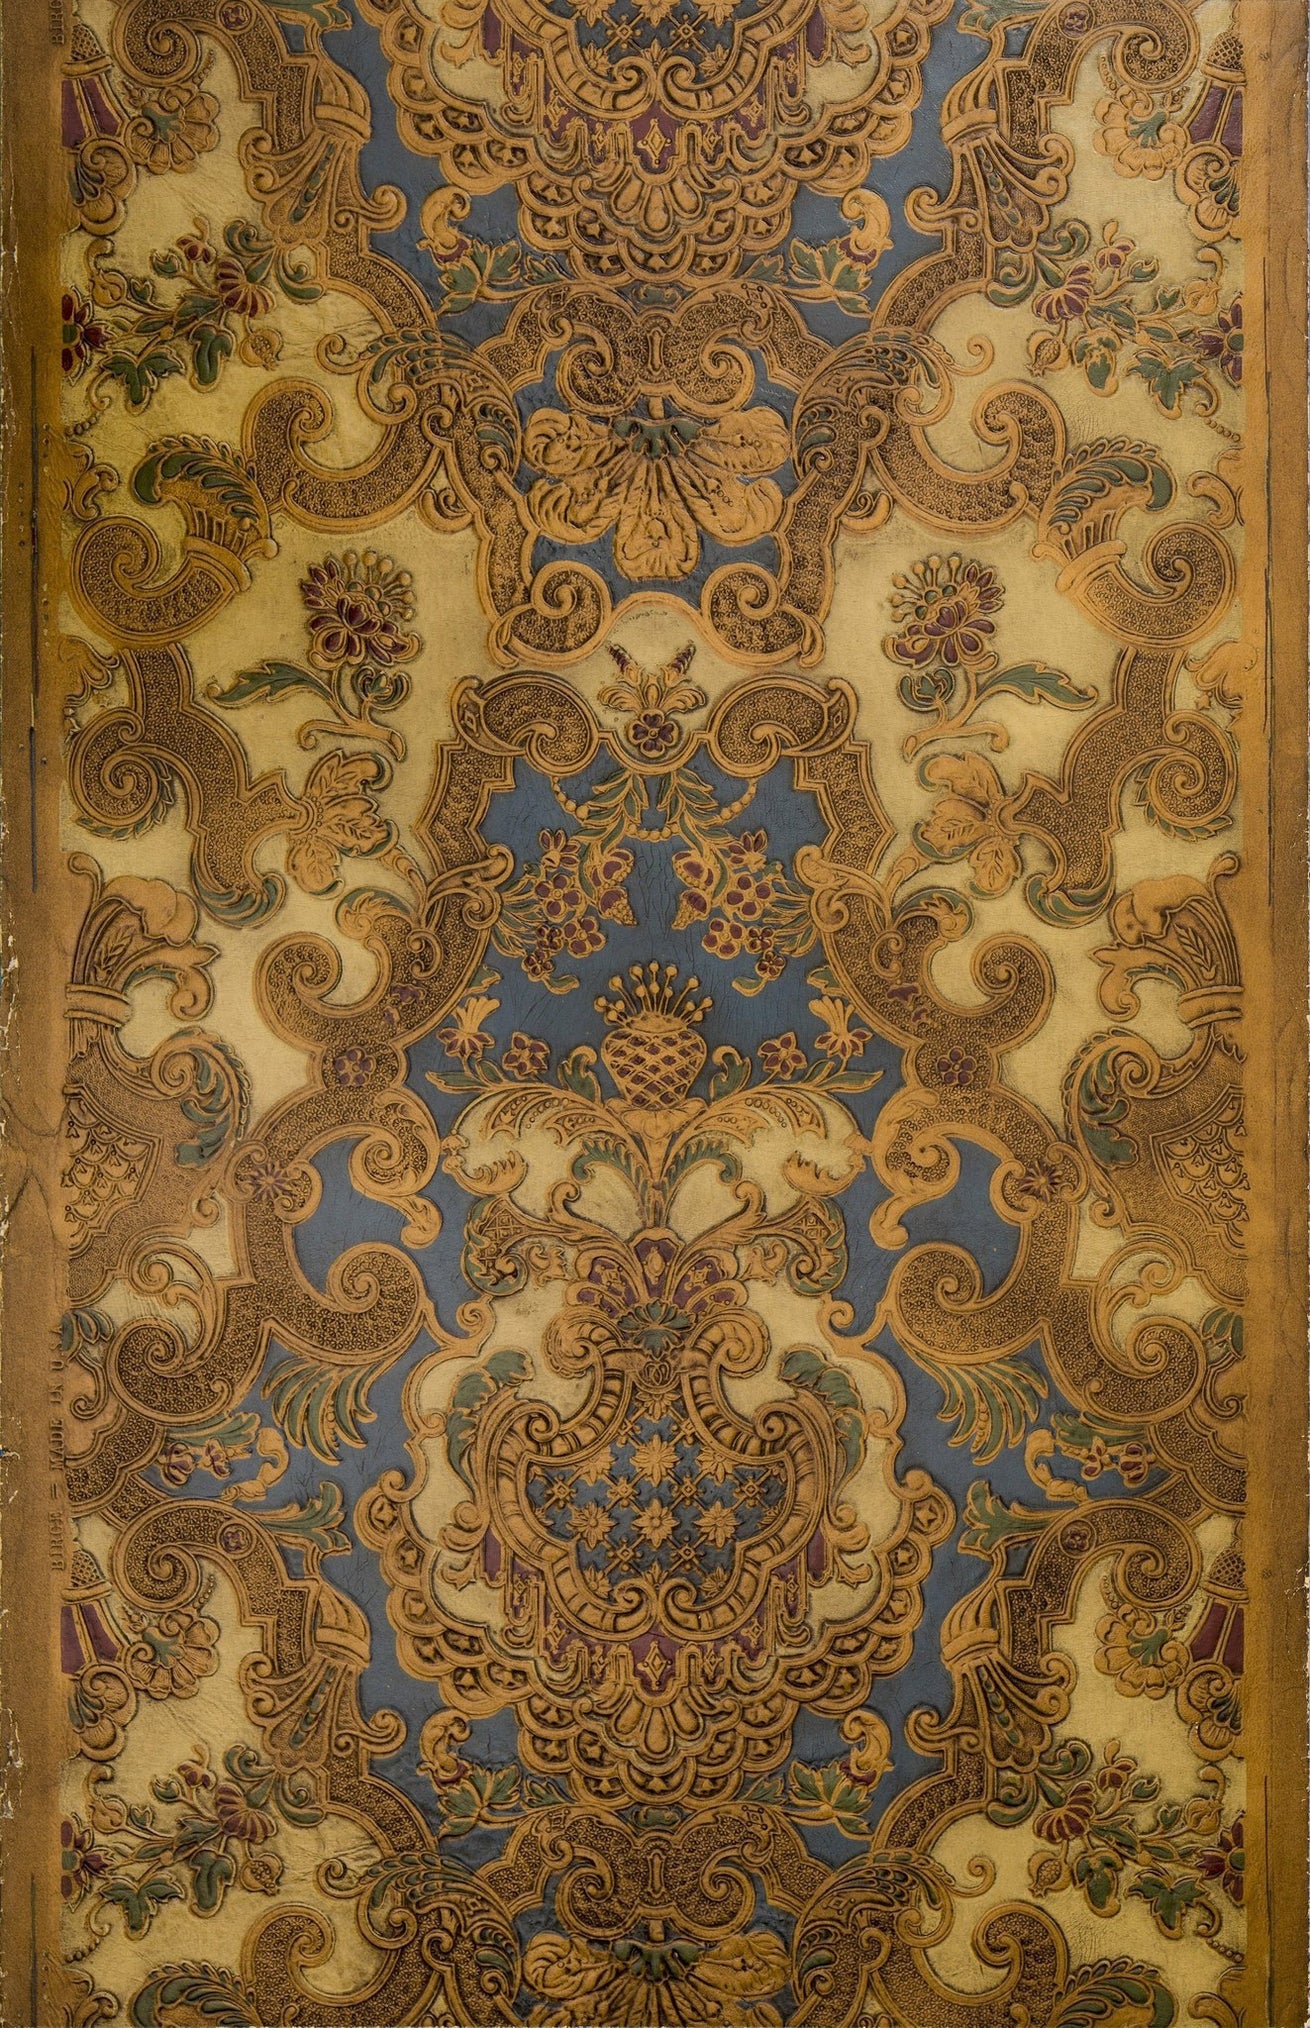 Intricate Rococo Tooled Leather - Antique Wallpaper Remnant